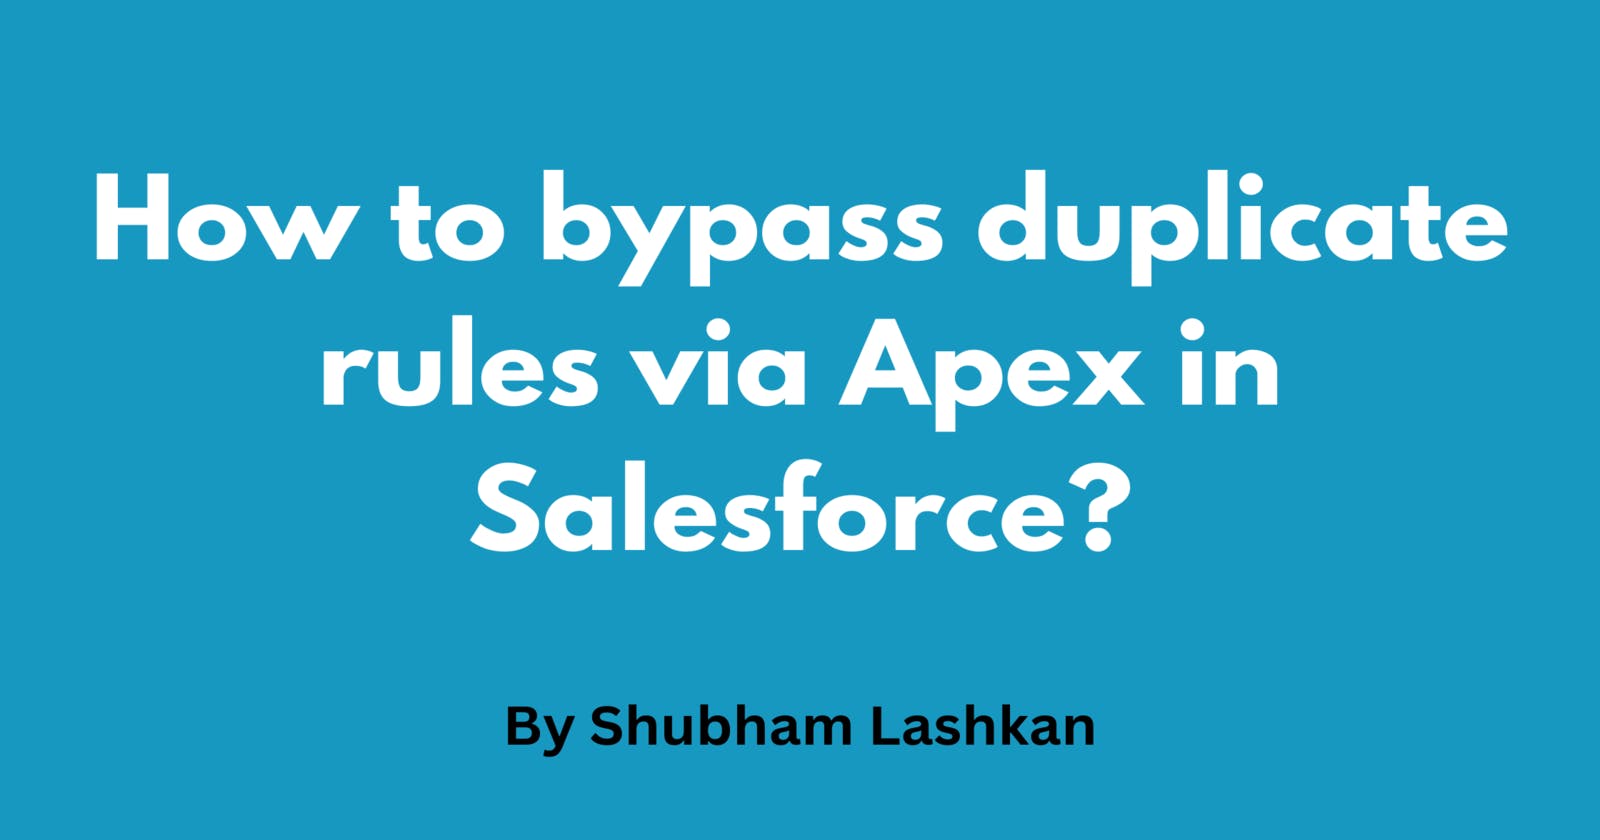 How to bypass duplicate rules via Apex in Salesforce?